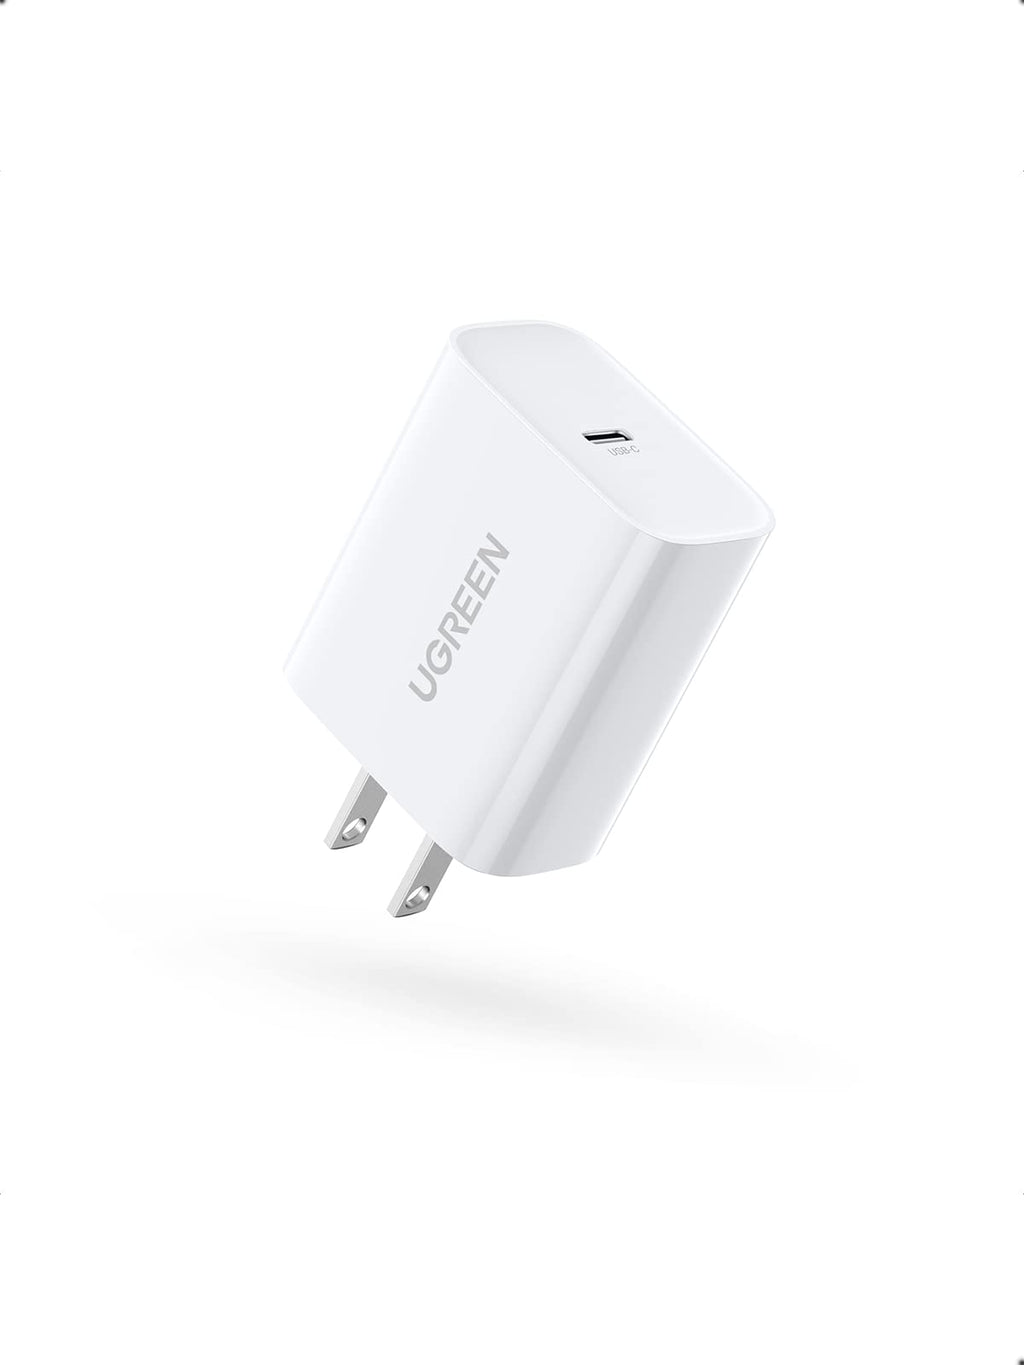  [AUSTRALIA] - UGREEN 30W USB C Wall Charger - PD Fast Charger USB-C Power Adapter Compatible for MacBook Air, iPhone 14/14 Pro/13 Pro/13 Pro Max, Galaxy S22 Ultra/S21/S20, iPad Mini/Pro, Pixel 6, Airpods